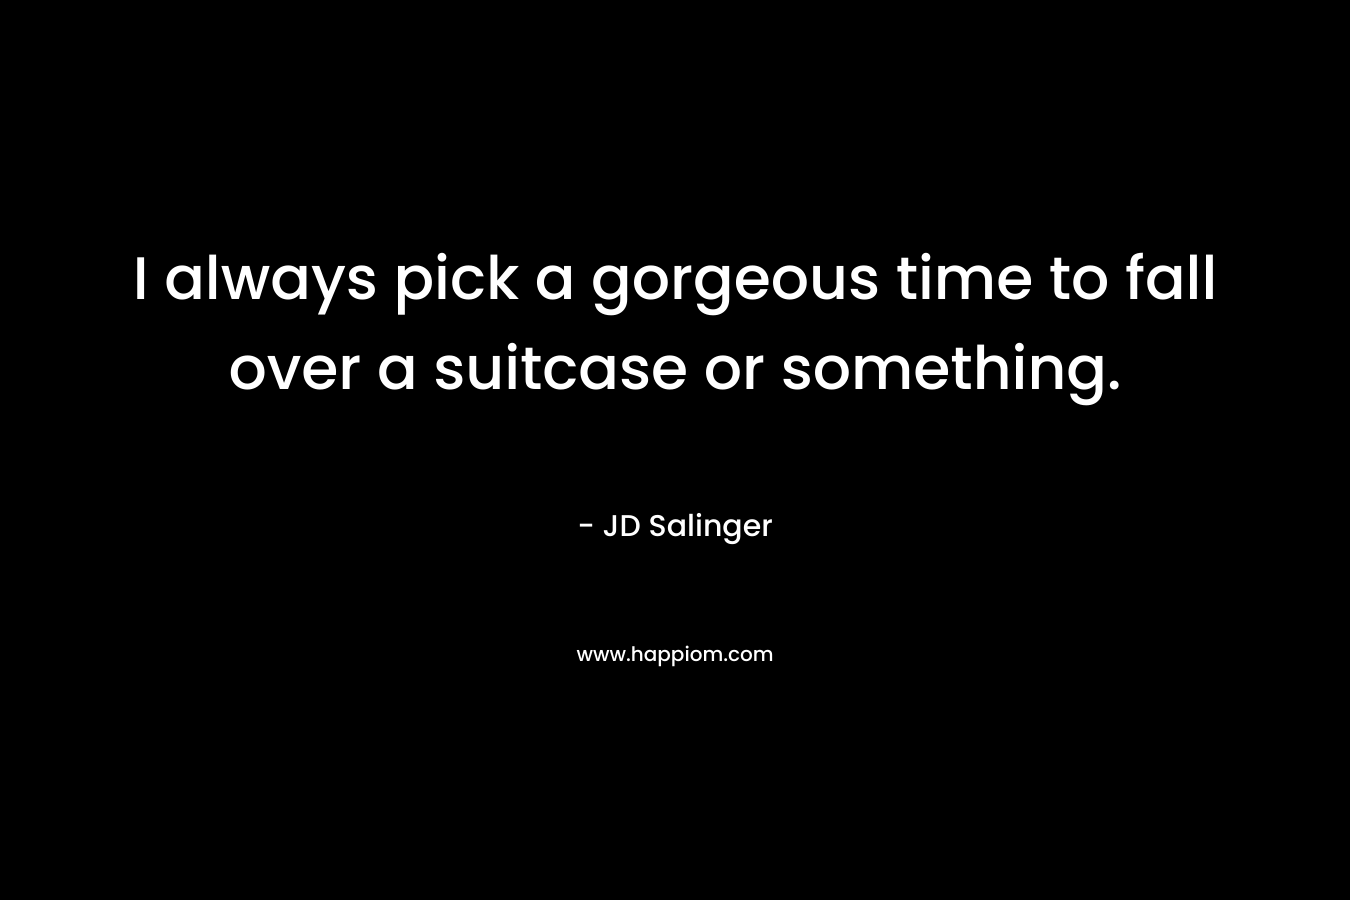 I always pick a gorgeous time to fall over a suitcase or something. – JD Salinger